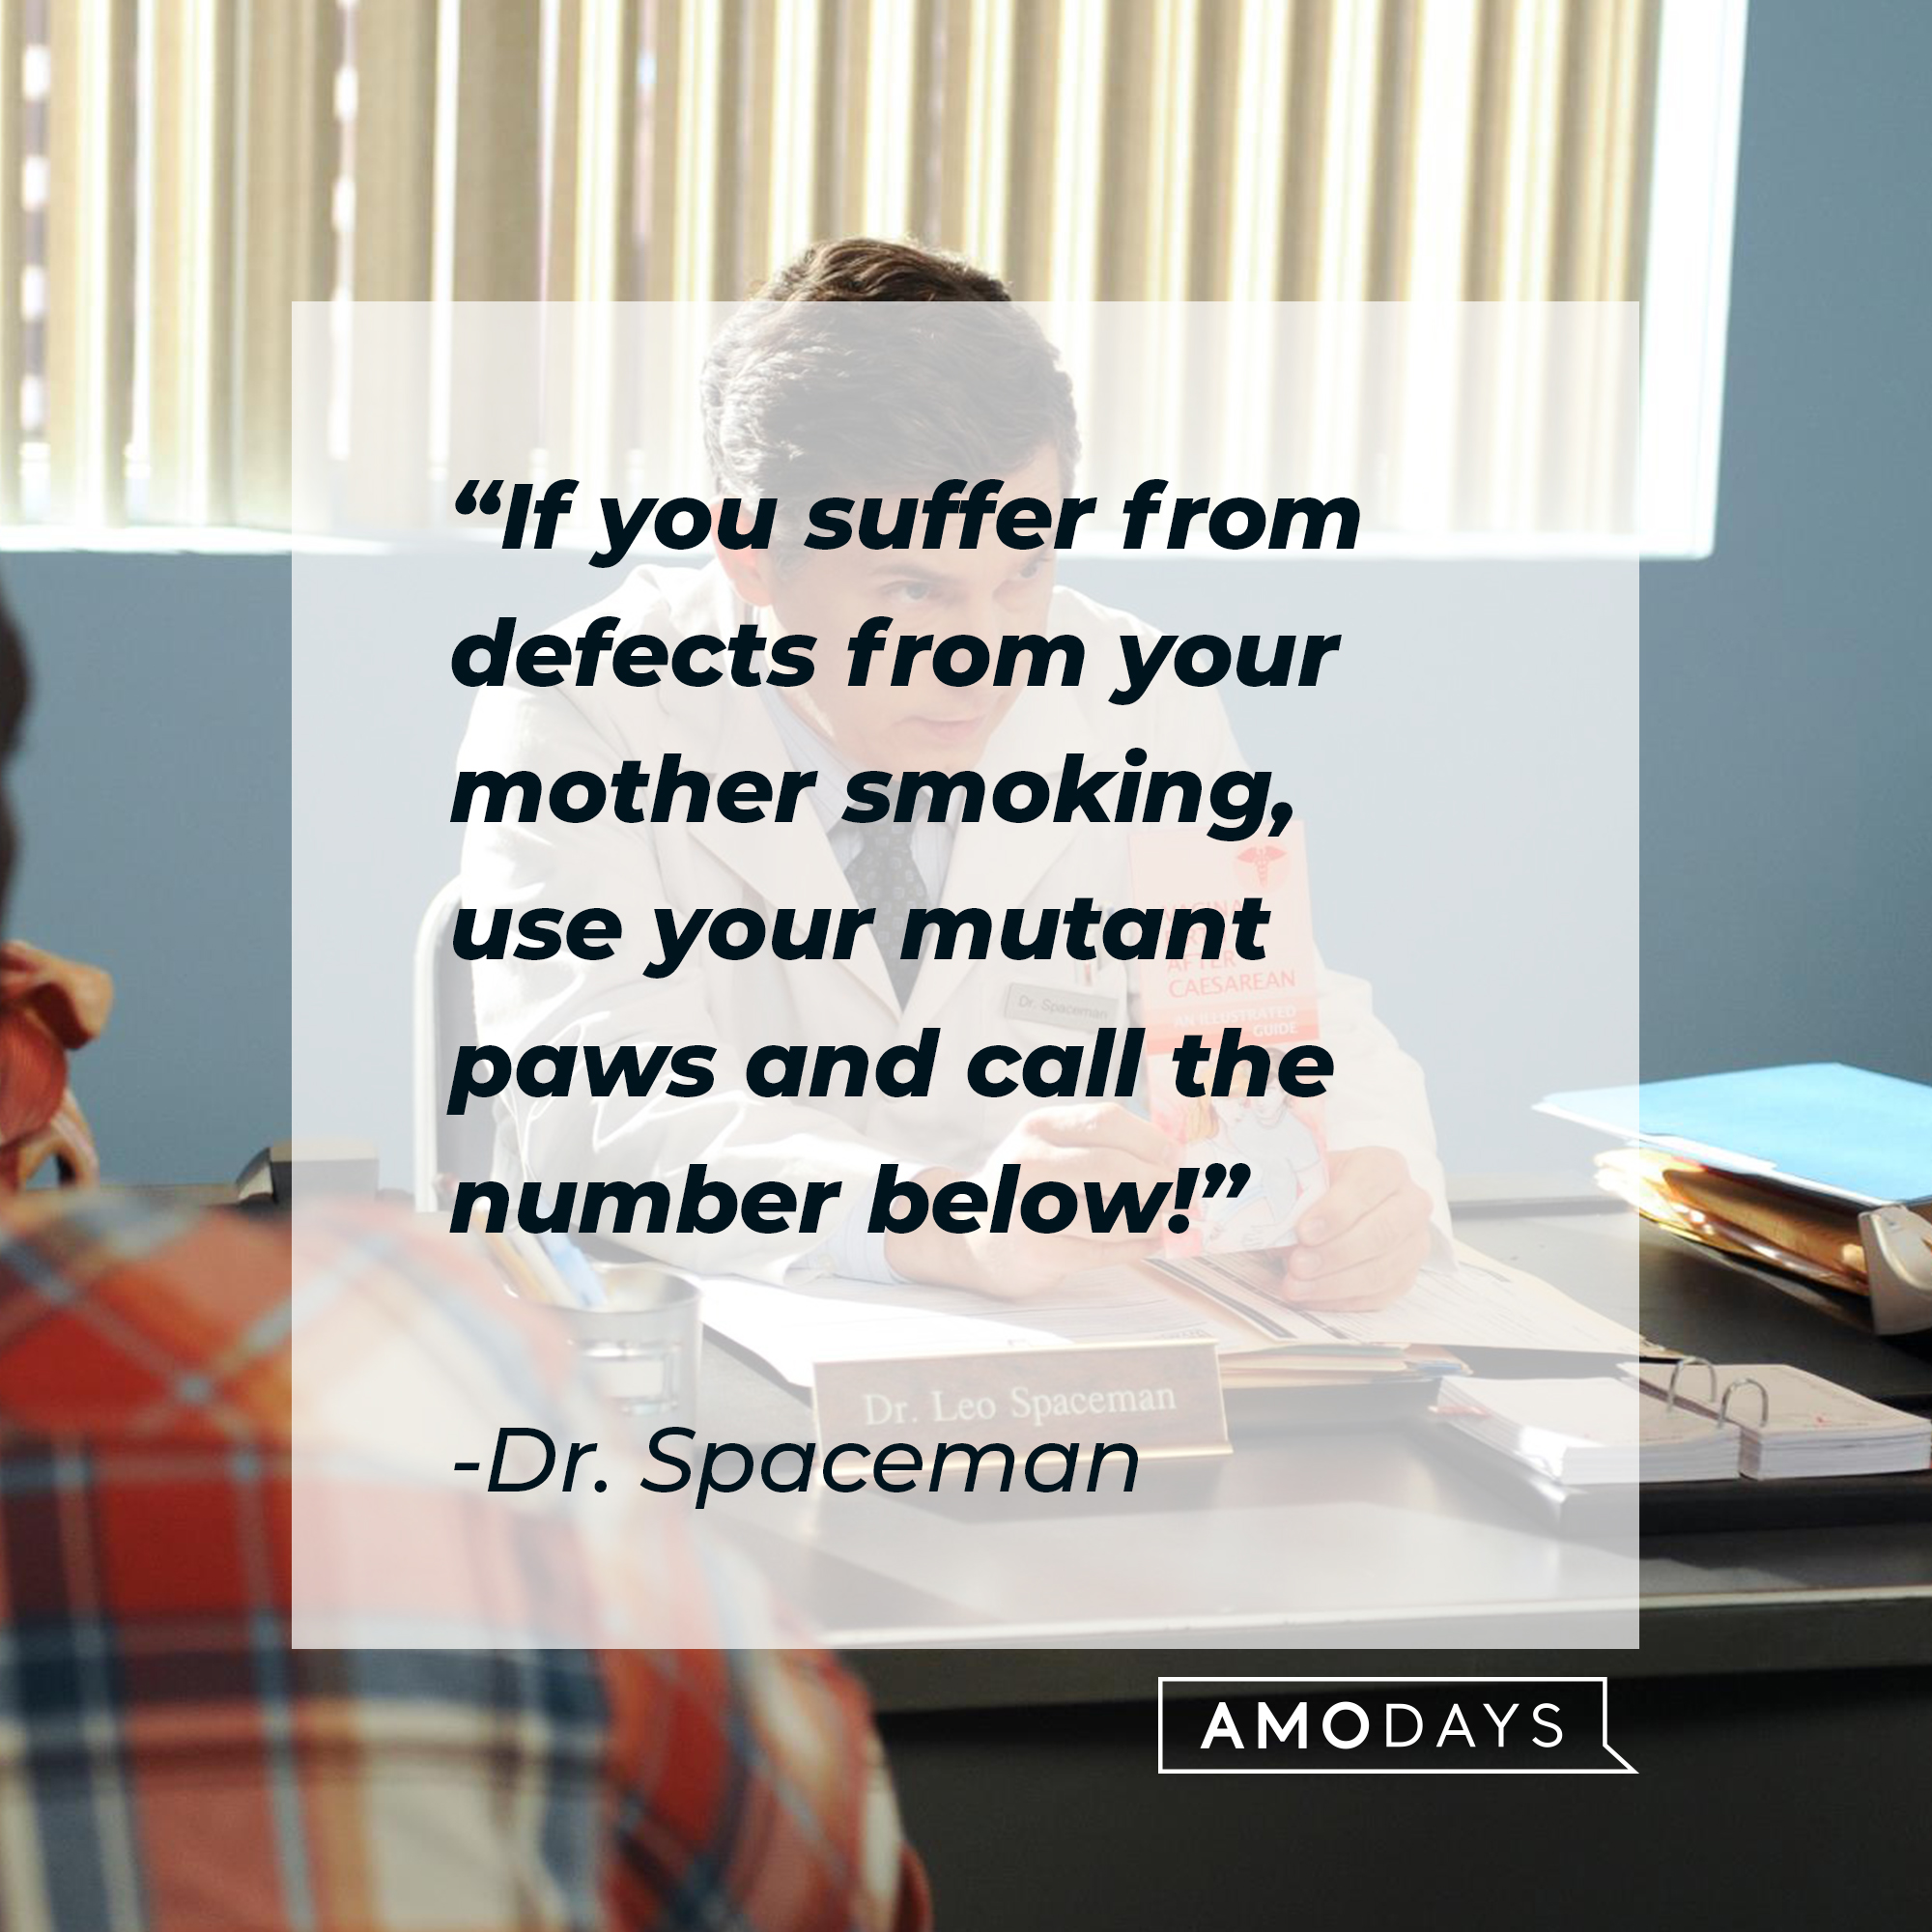 Dr. Spaceman's quote: "If you suffer from defects from your mother smoking, use your mutant paws and call the number below!" | Source: facebook.com/30RockTV